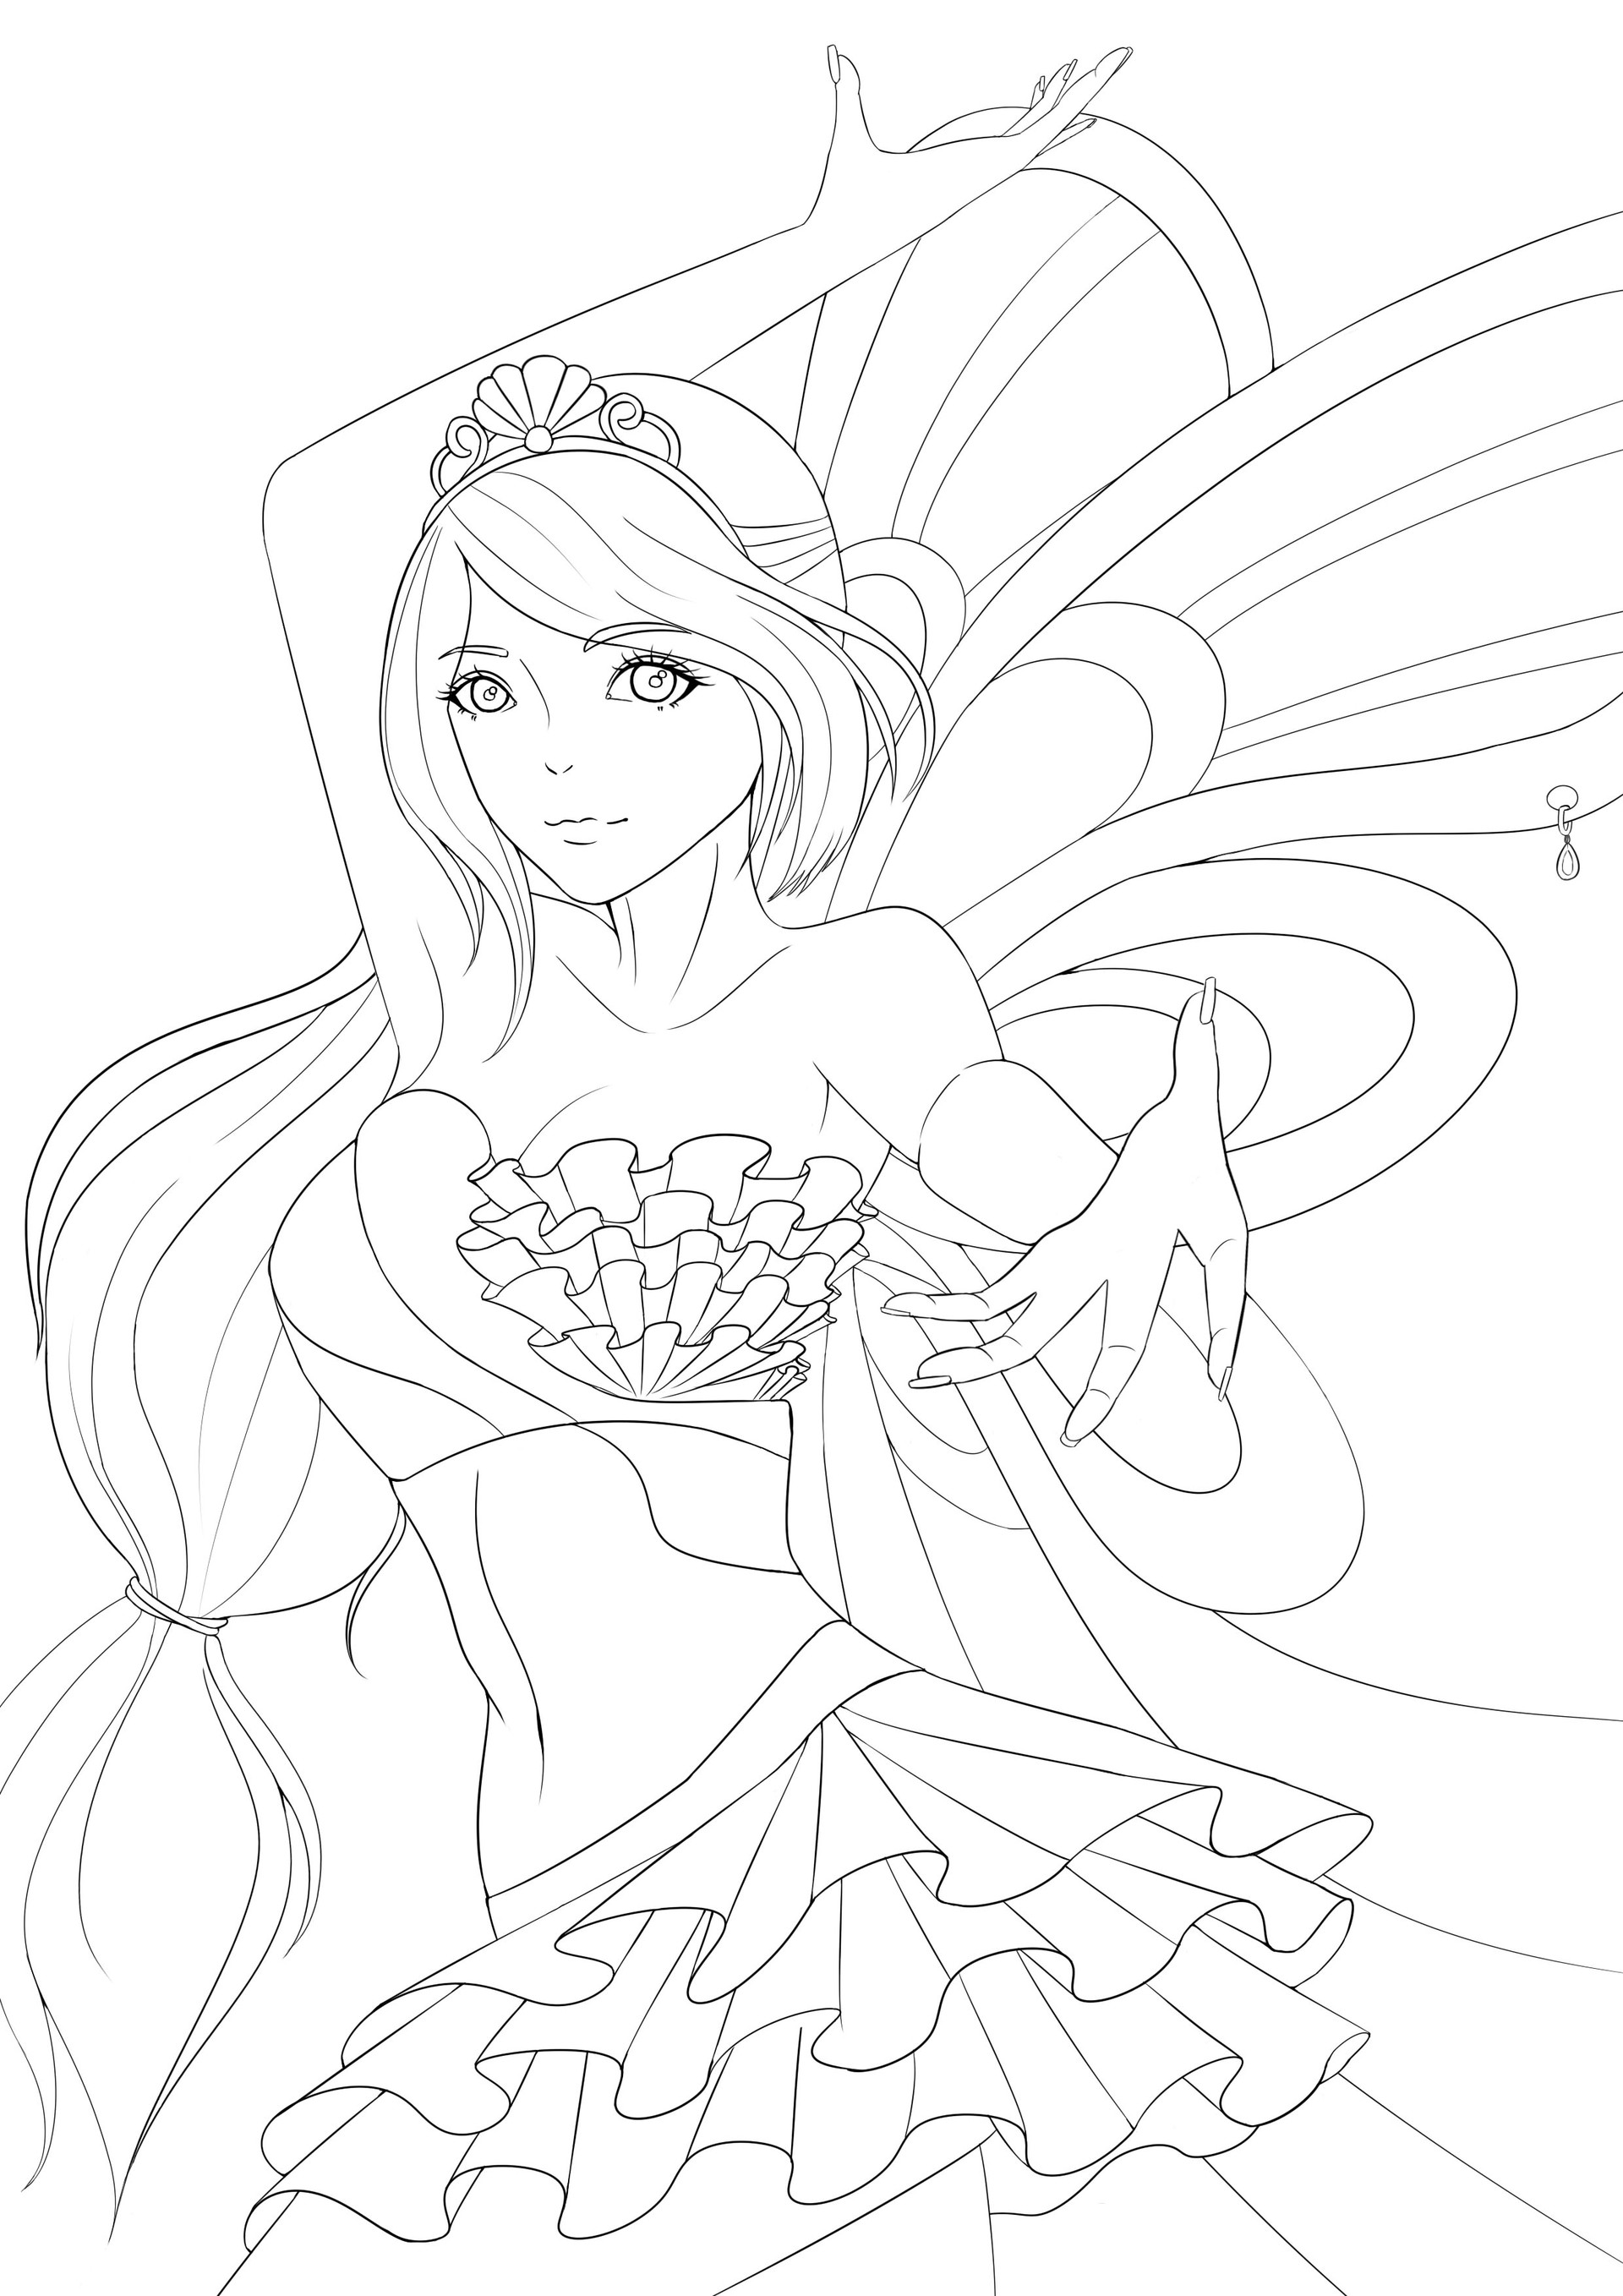 Winx Club Stella 2 coloring page | Free Printable Coloring Pages